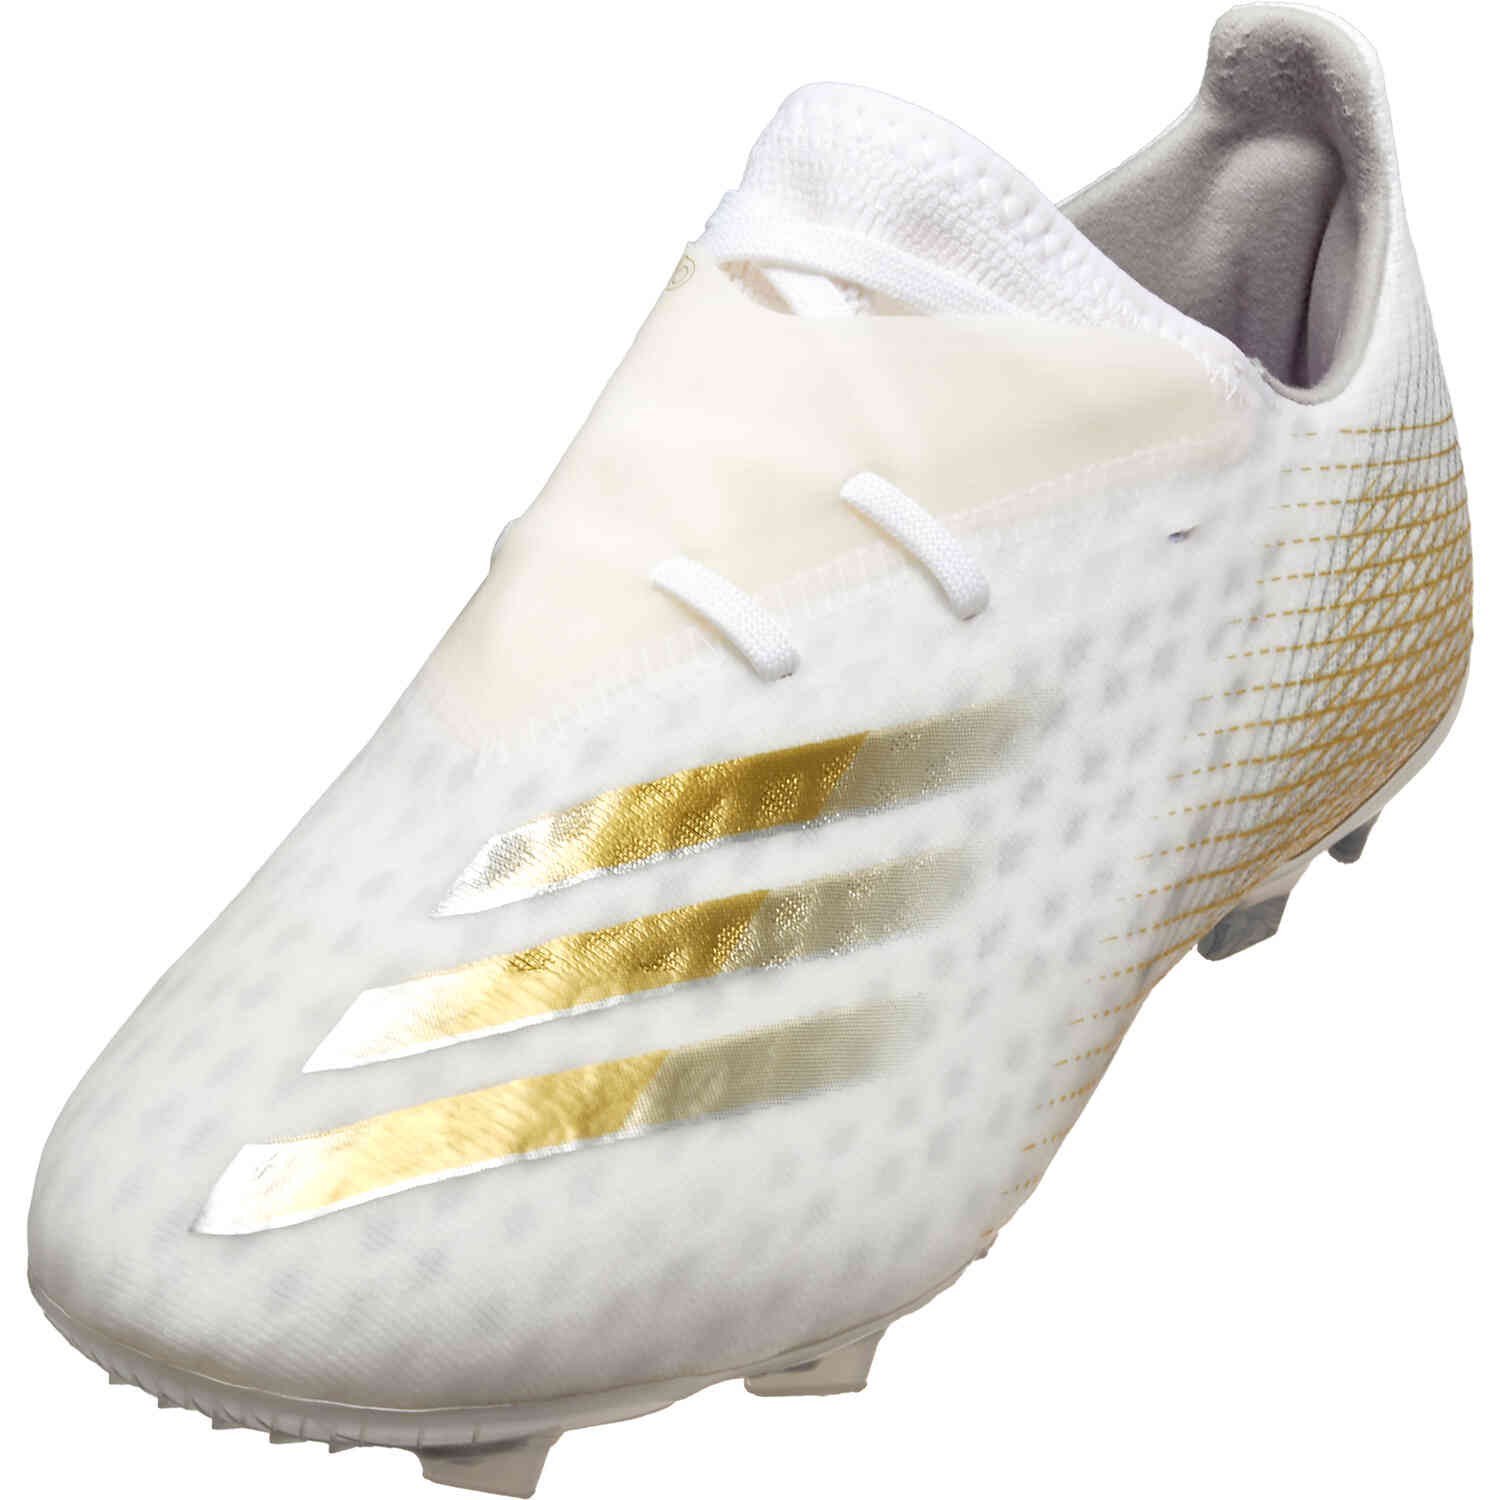 adidas X Ghosted.2 FG - InFlight 